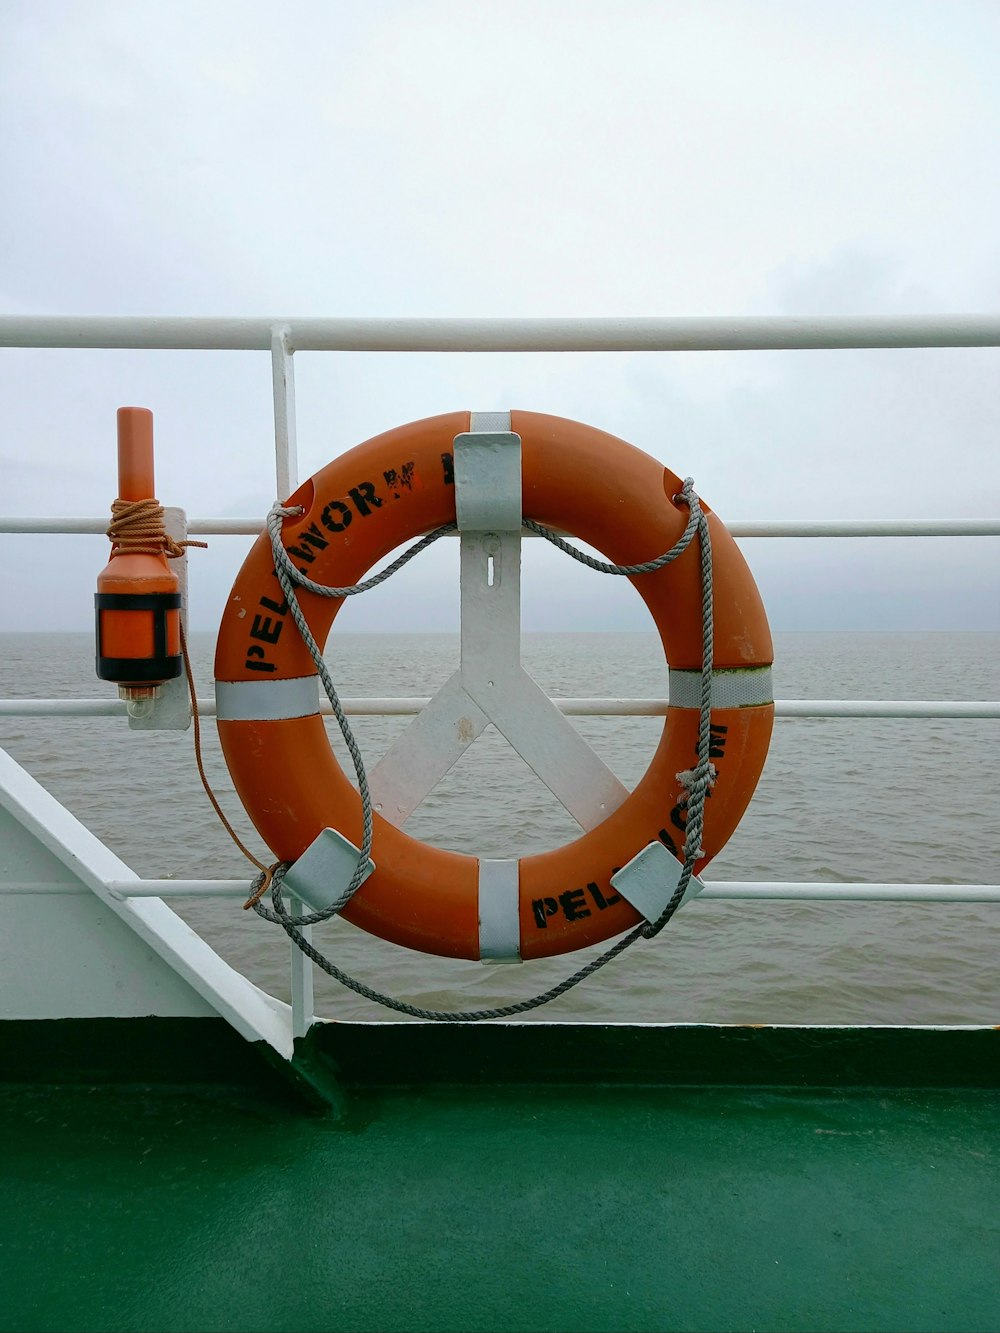 a life preserver on a boat in the ocean